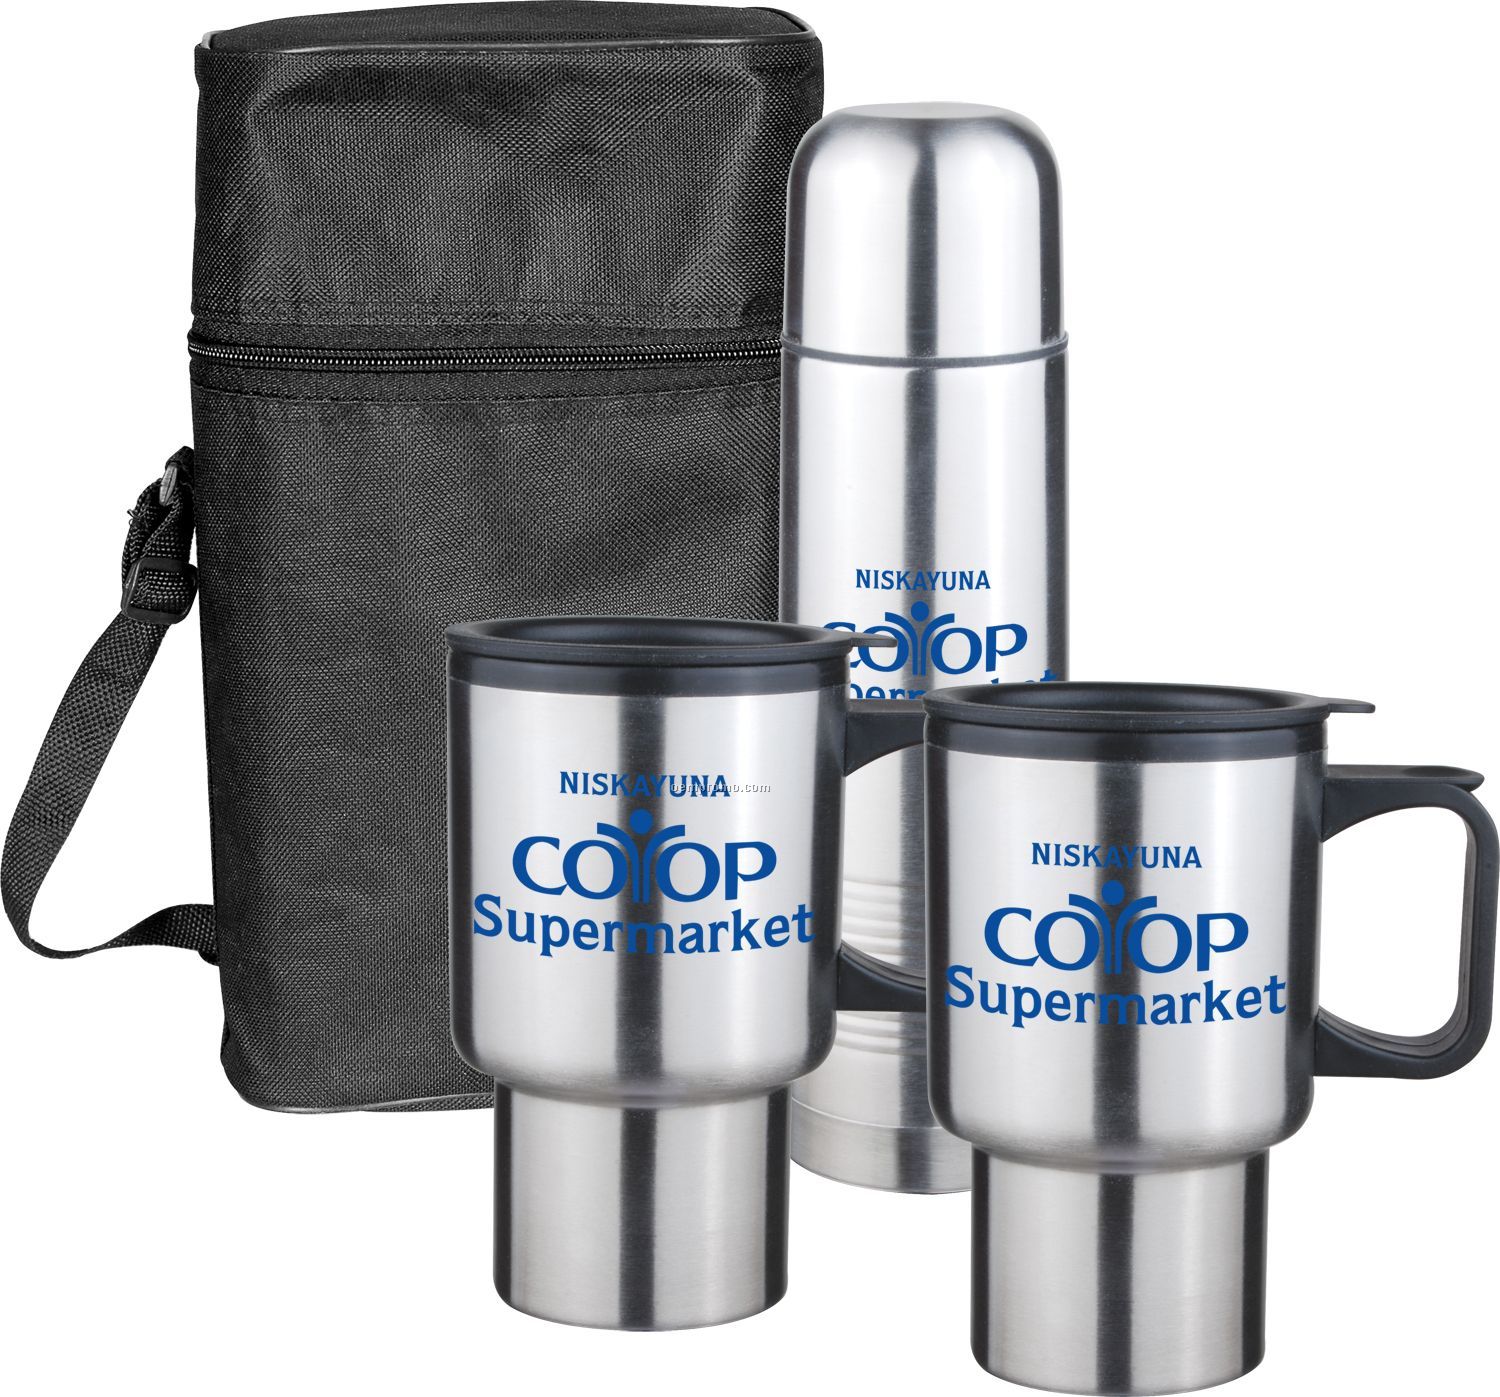 4 Piece Stainless Steel Travel Set - Imprinted